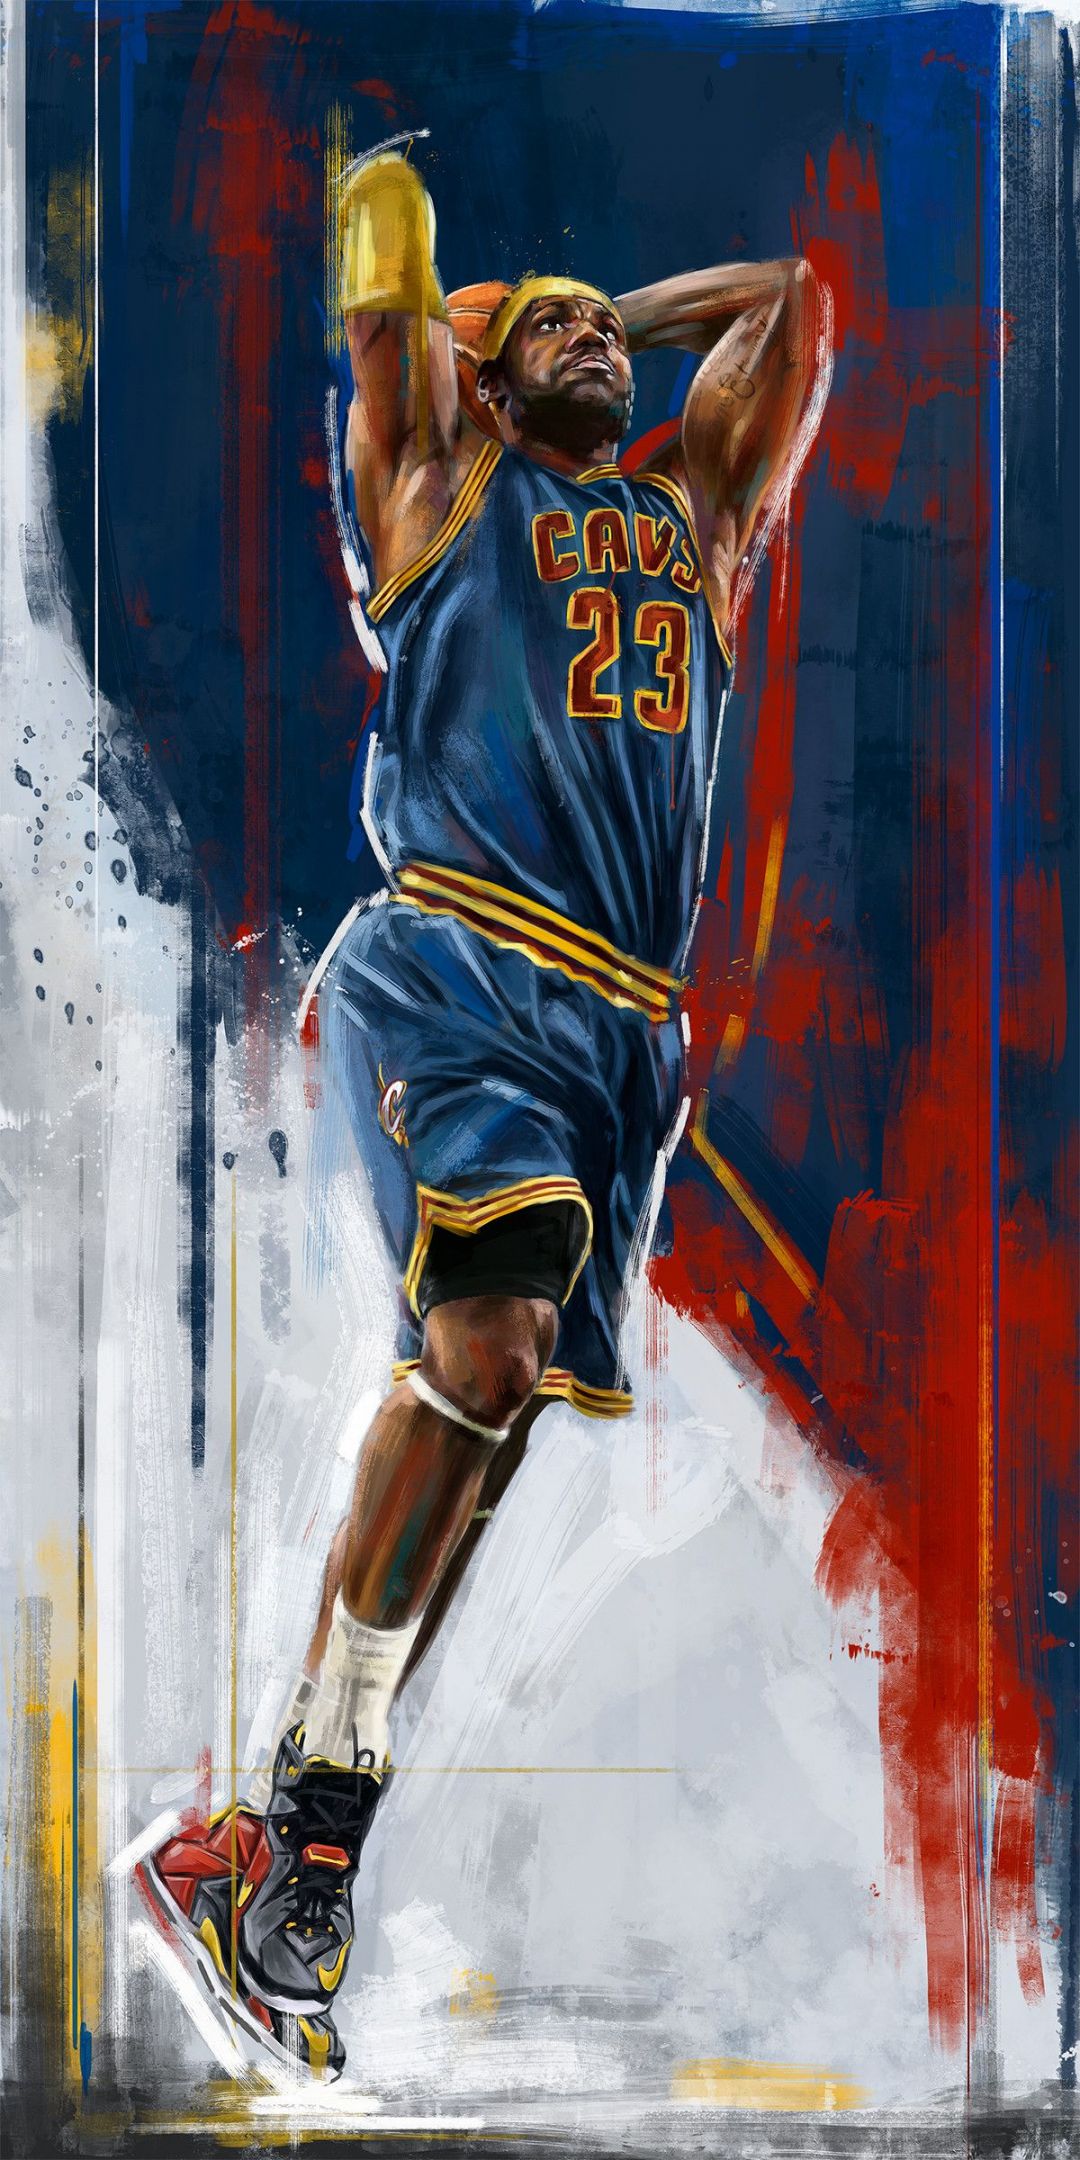 ✓[105+] Lebron James Slam Dunk Wallpaper - Android / iPhone HD Wallpaper  Background Download (png / jpg) (2023)